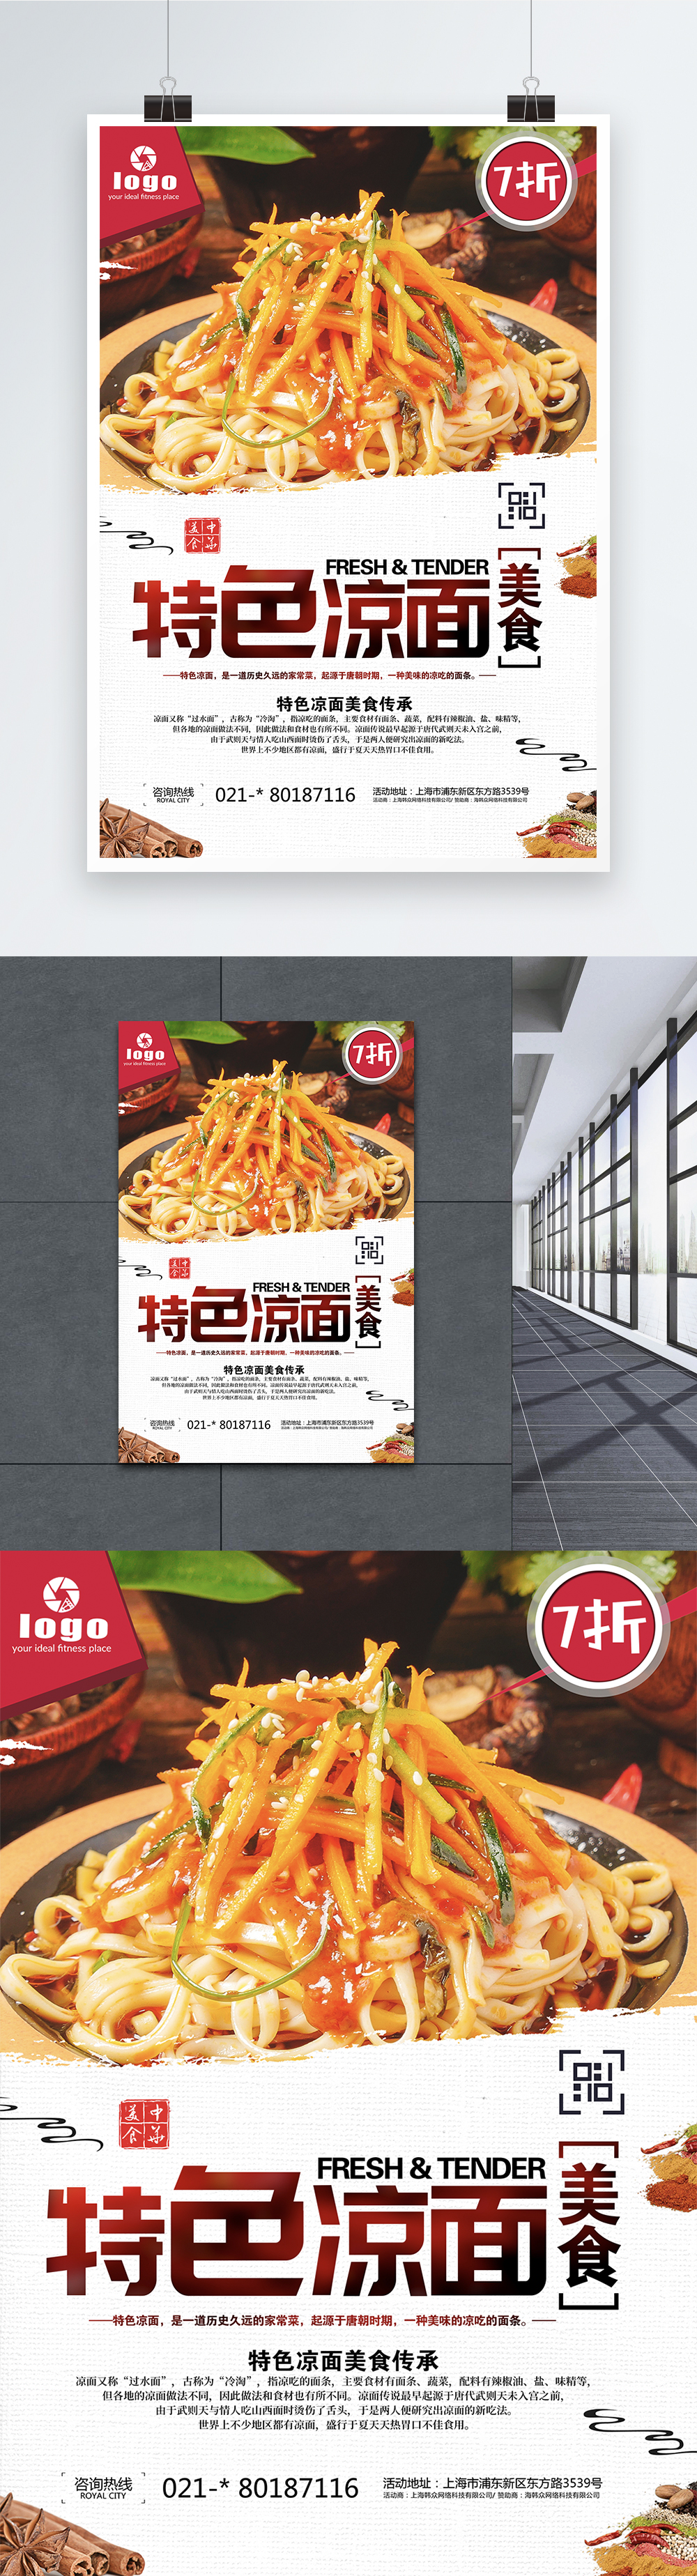 Download Yellow Kung Fu Noodle Shop Poster Template Image Picture Free Download 400738482 Lovepik Com PSD Mockup Templates